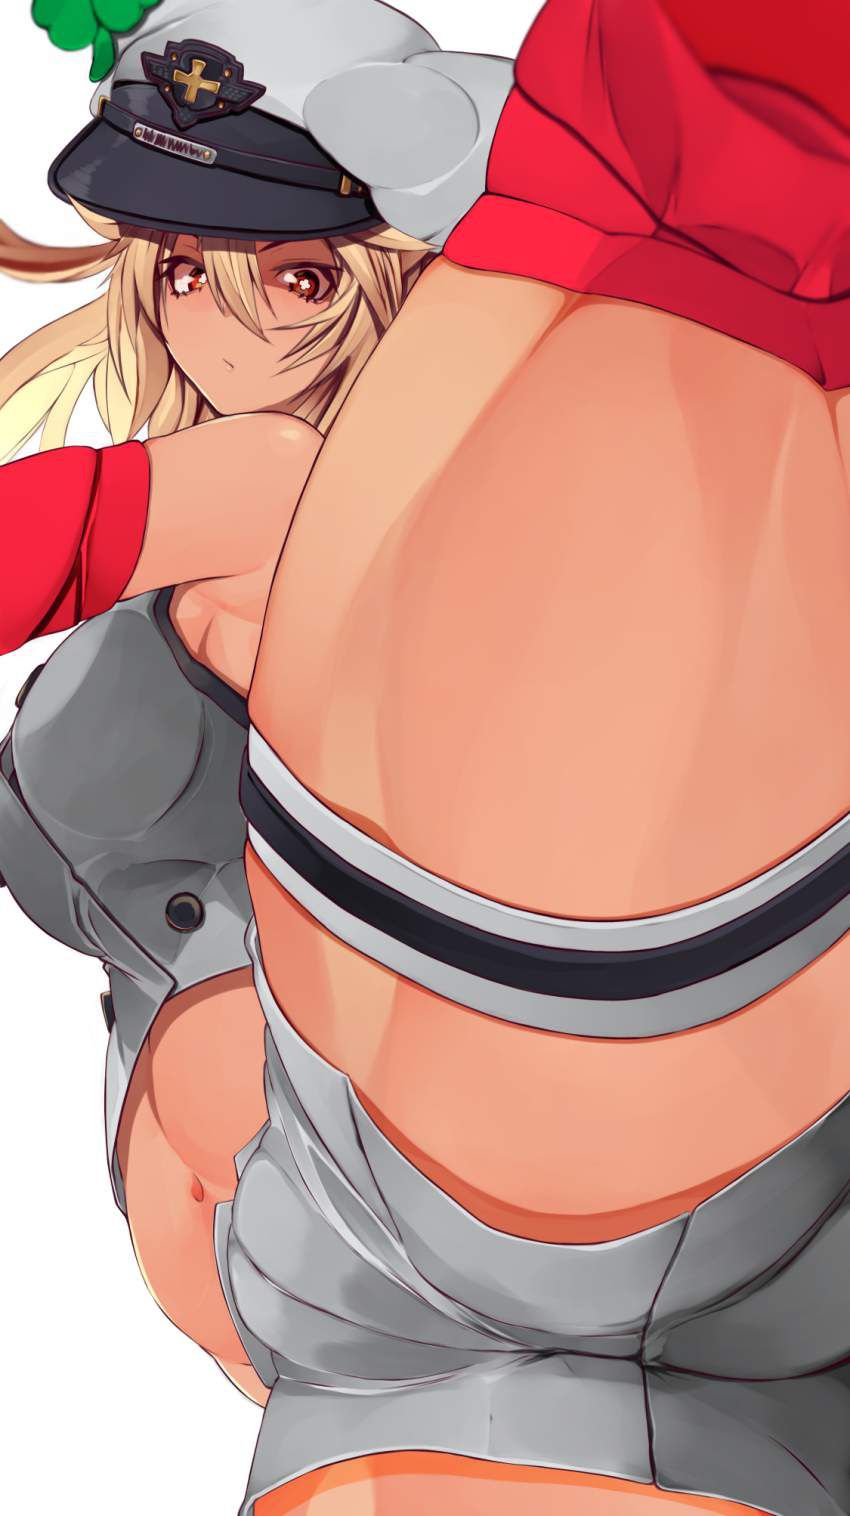 Please erotic images of Guilty Gear 16